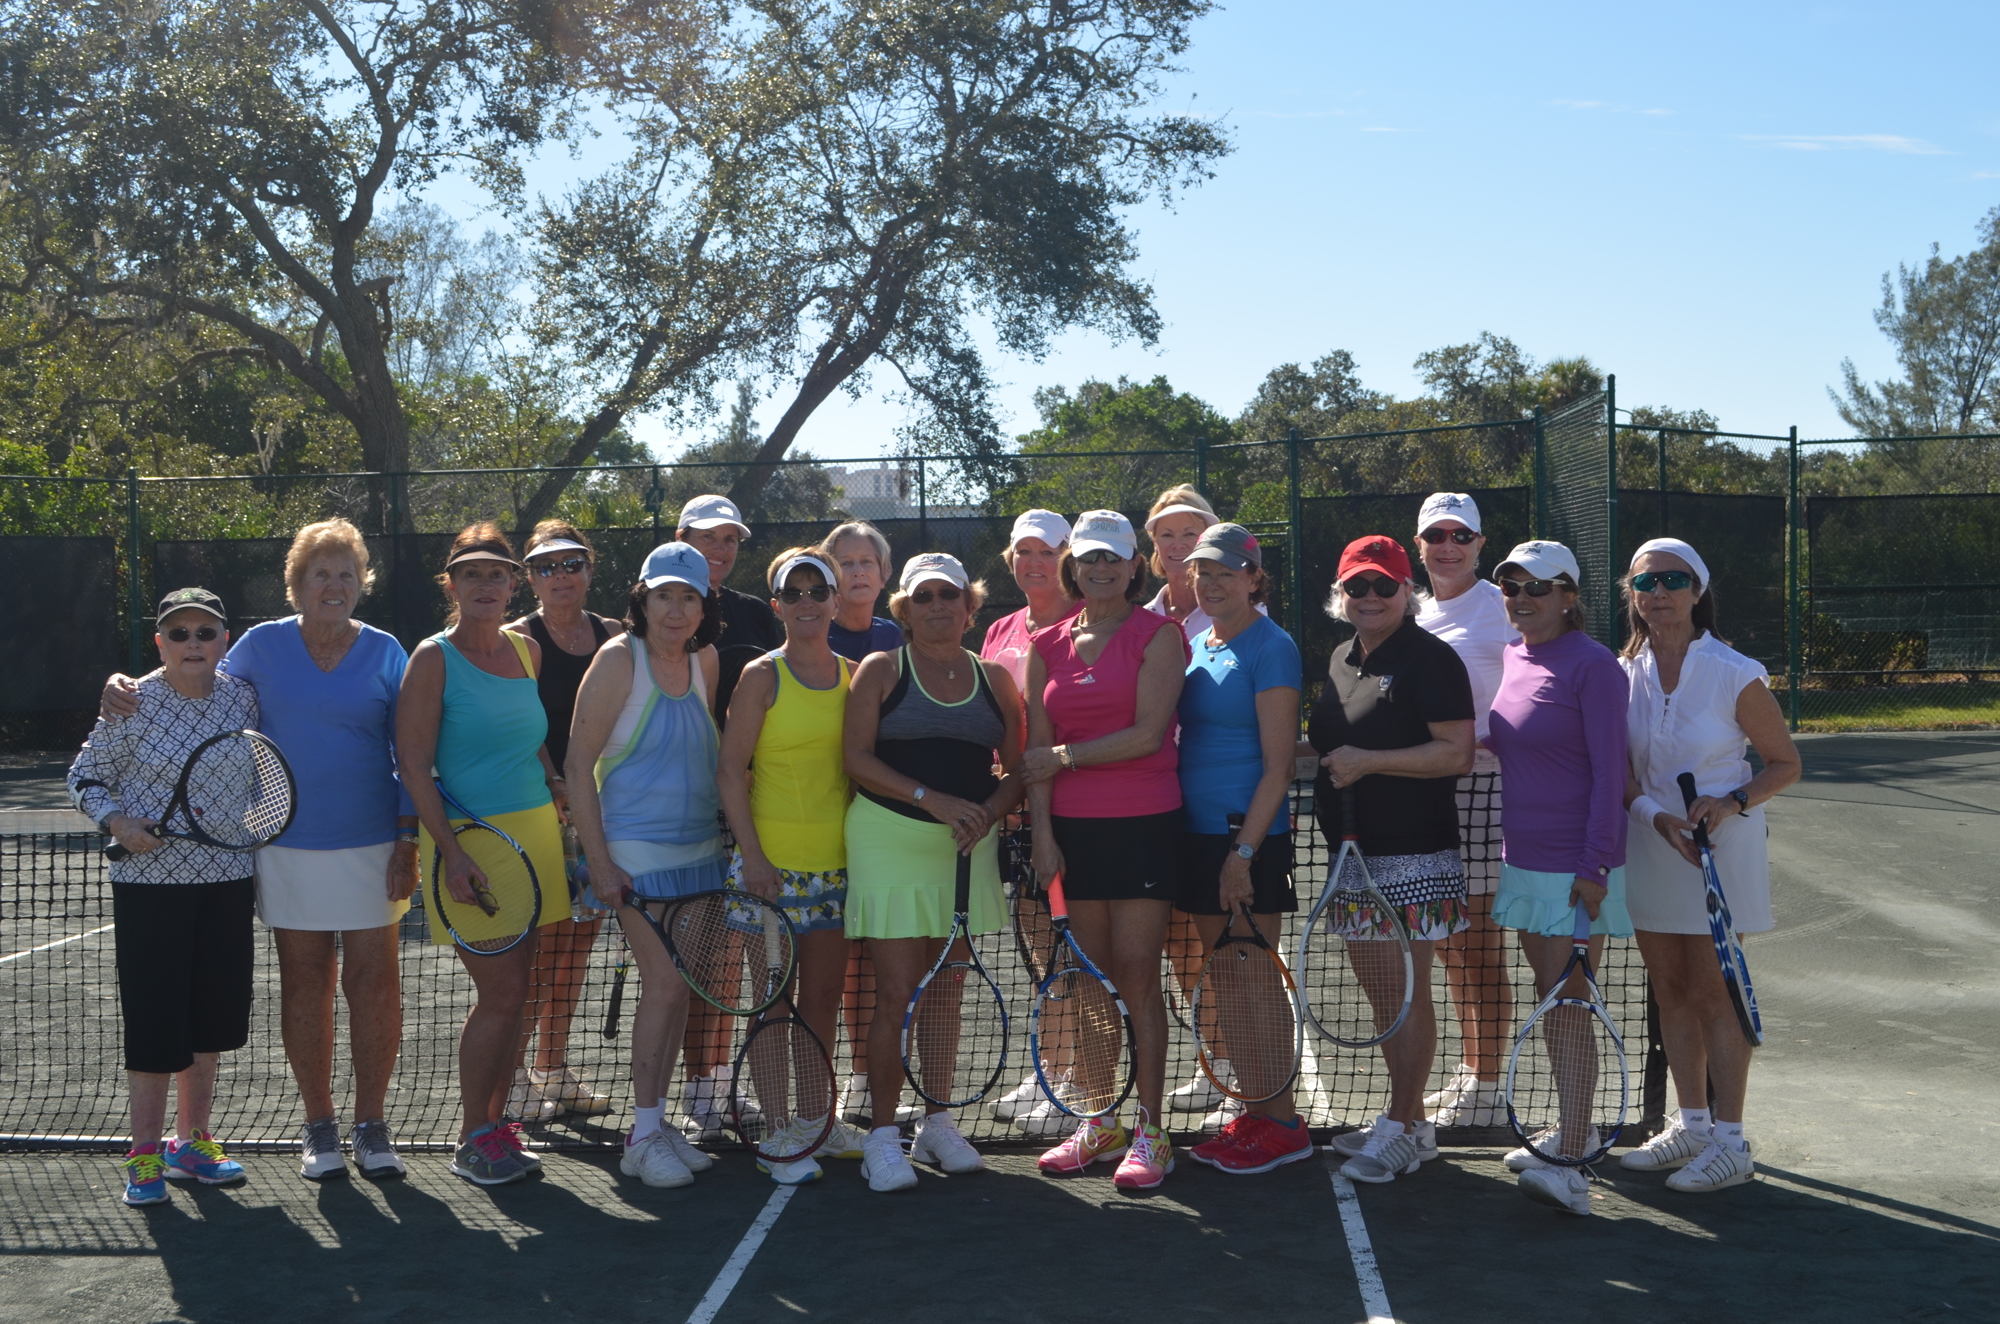 16 members of Rombo smile after a tennis-filled morning on Nov. 12 